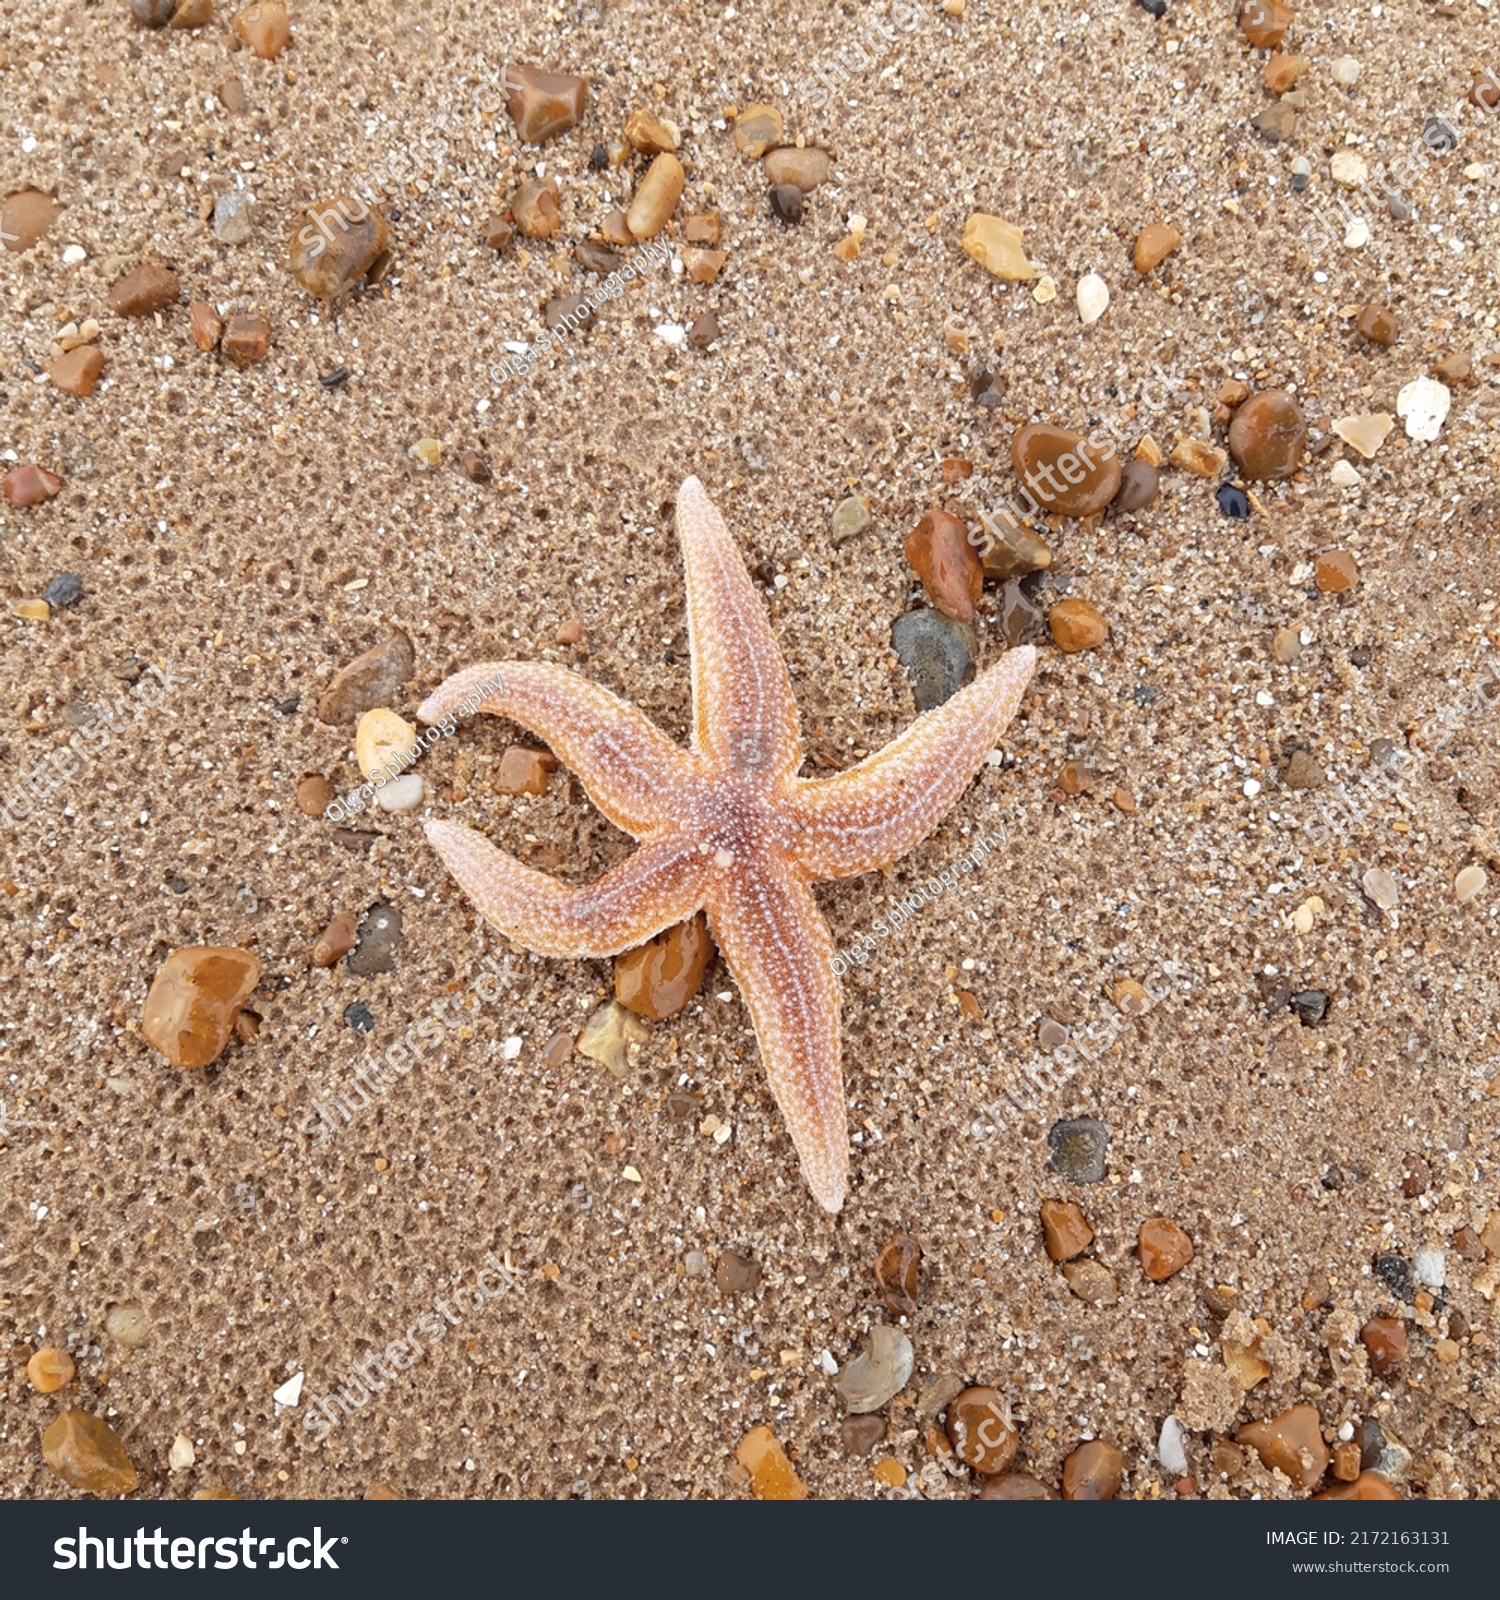 Starfish or sea stars are star-shaped echinoderms belonging to the class Asteroidea. Starfish on the beach in Landguard nature reserve in Felixstowe, Suffolk, East Anglia,  England, Europe. #2172163131